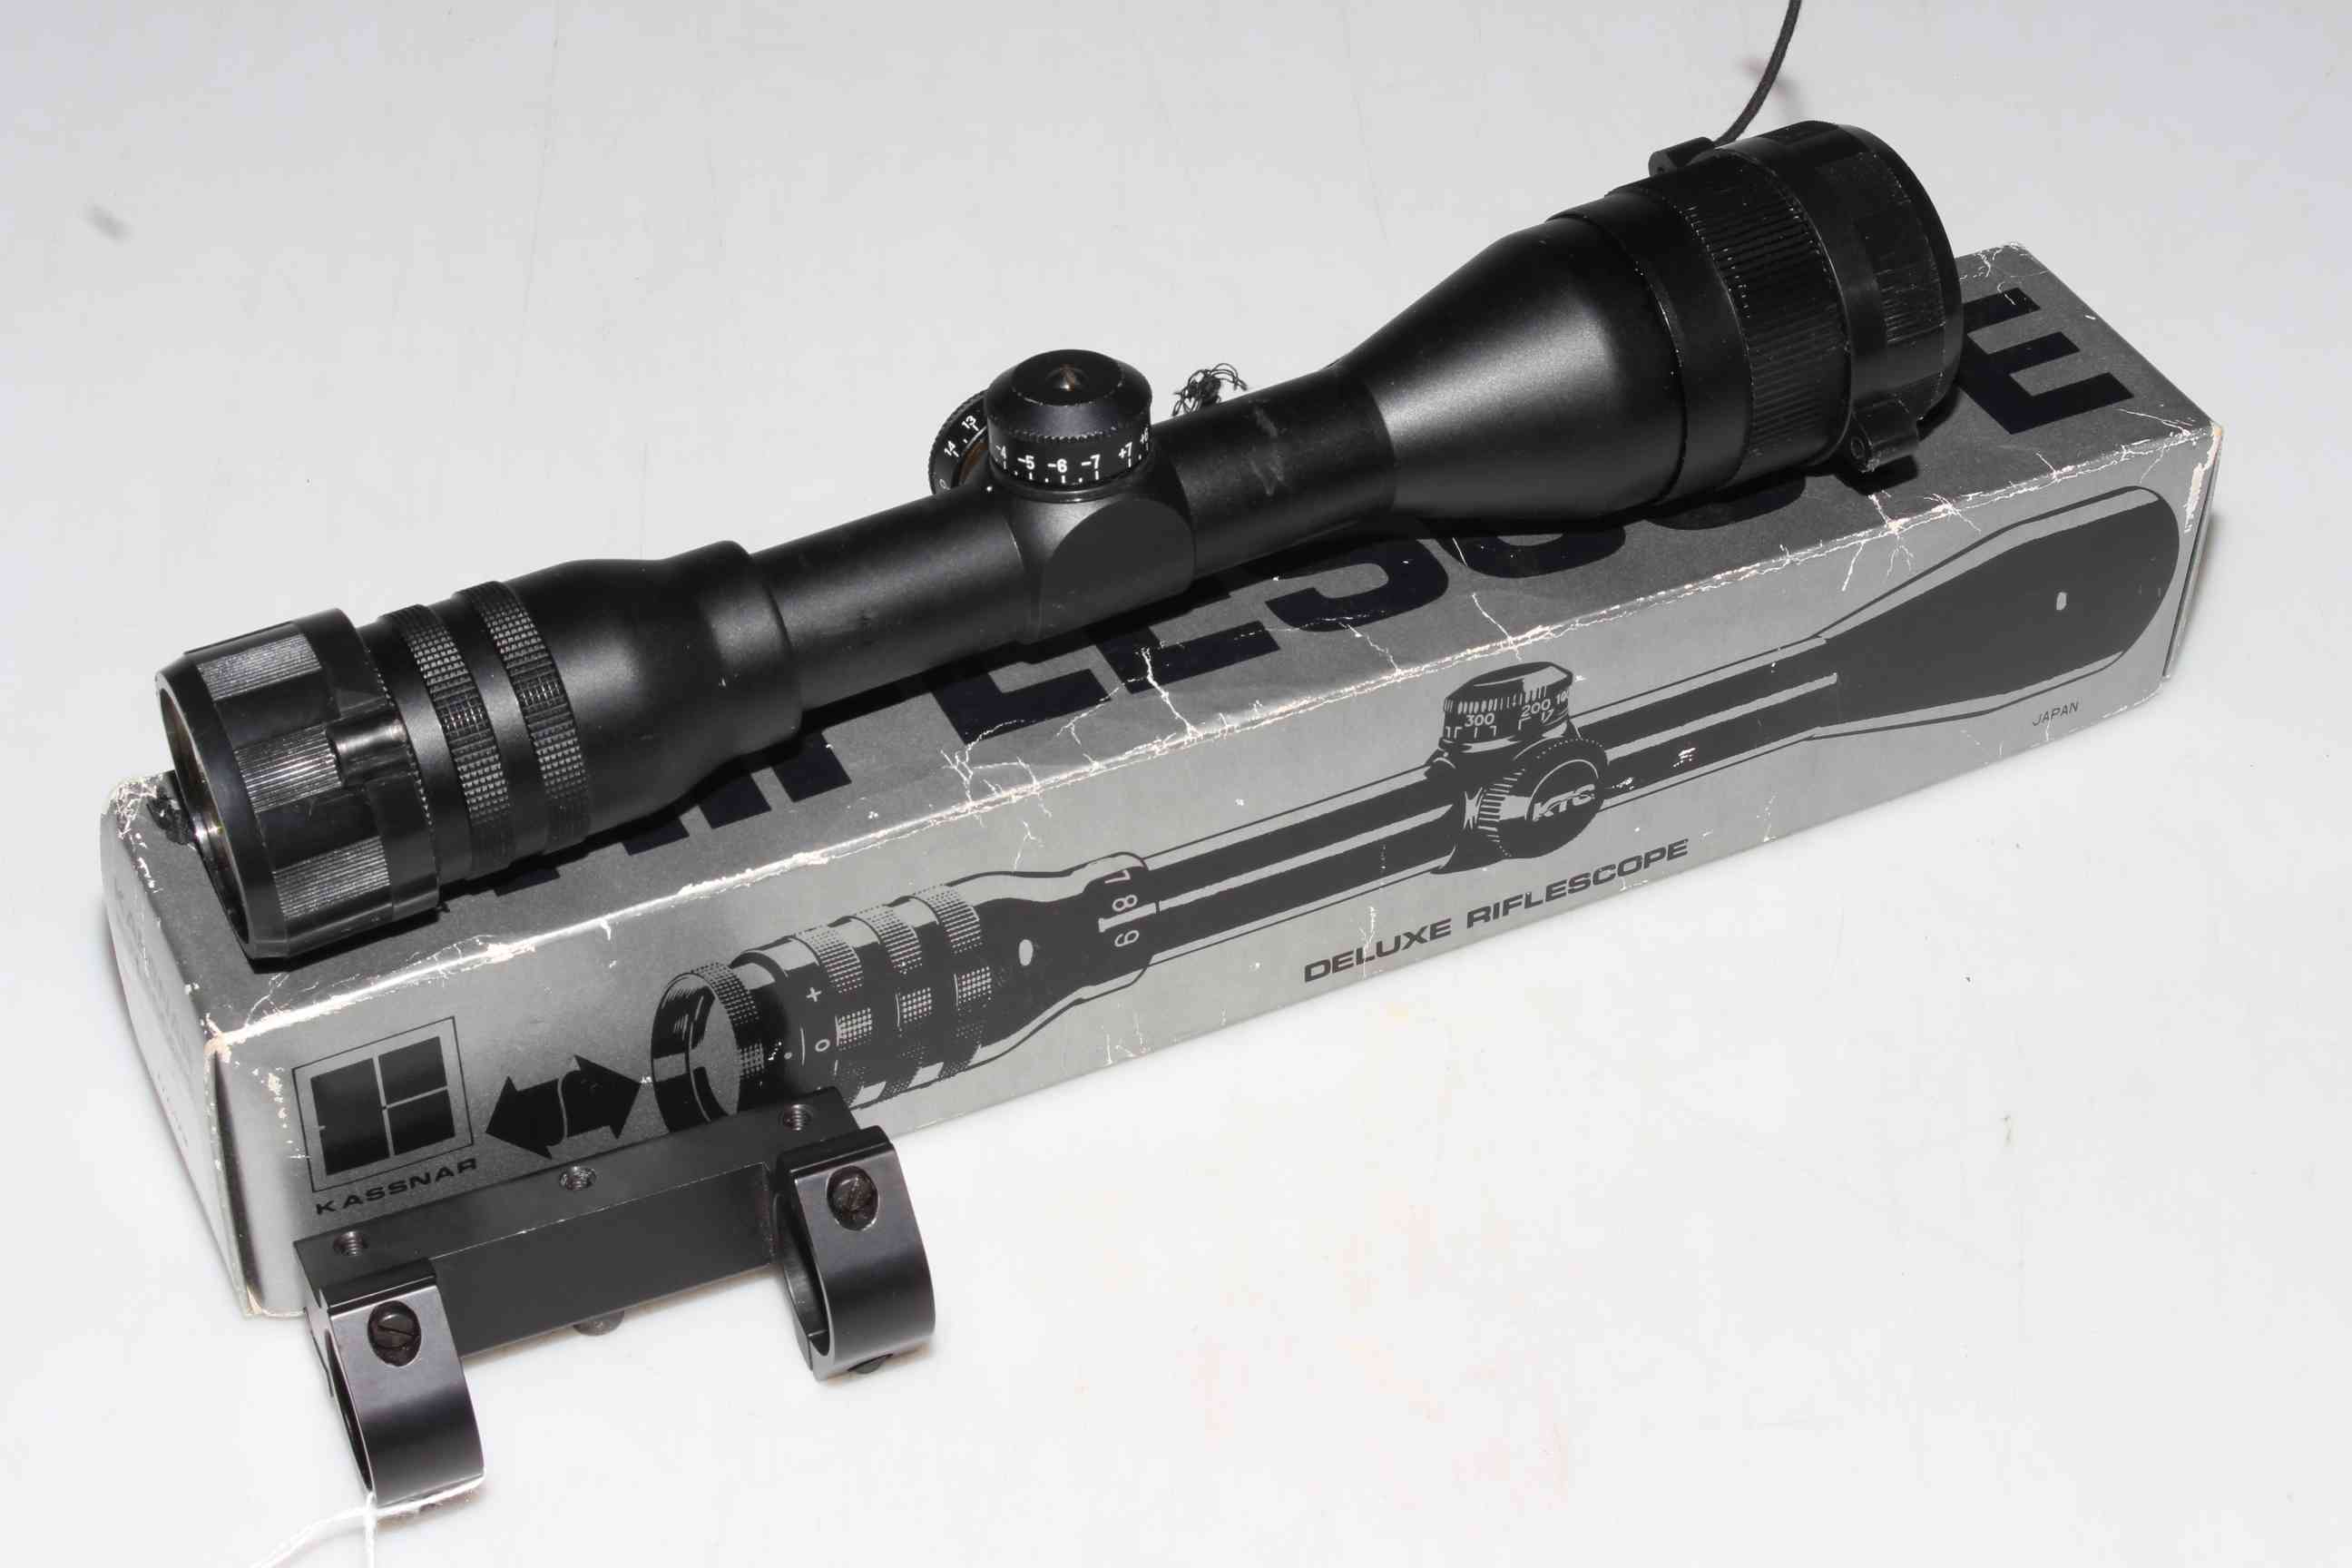 Kassnar 4x40 riflescope and gun mounting, boxed.